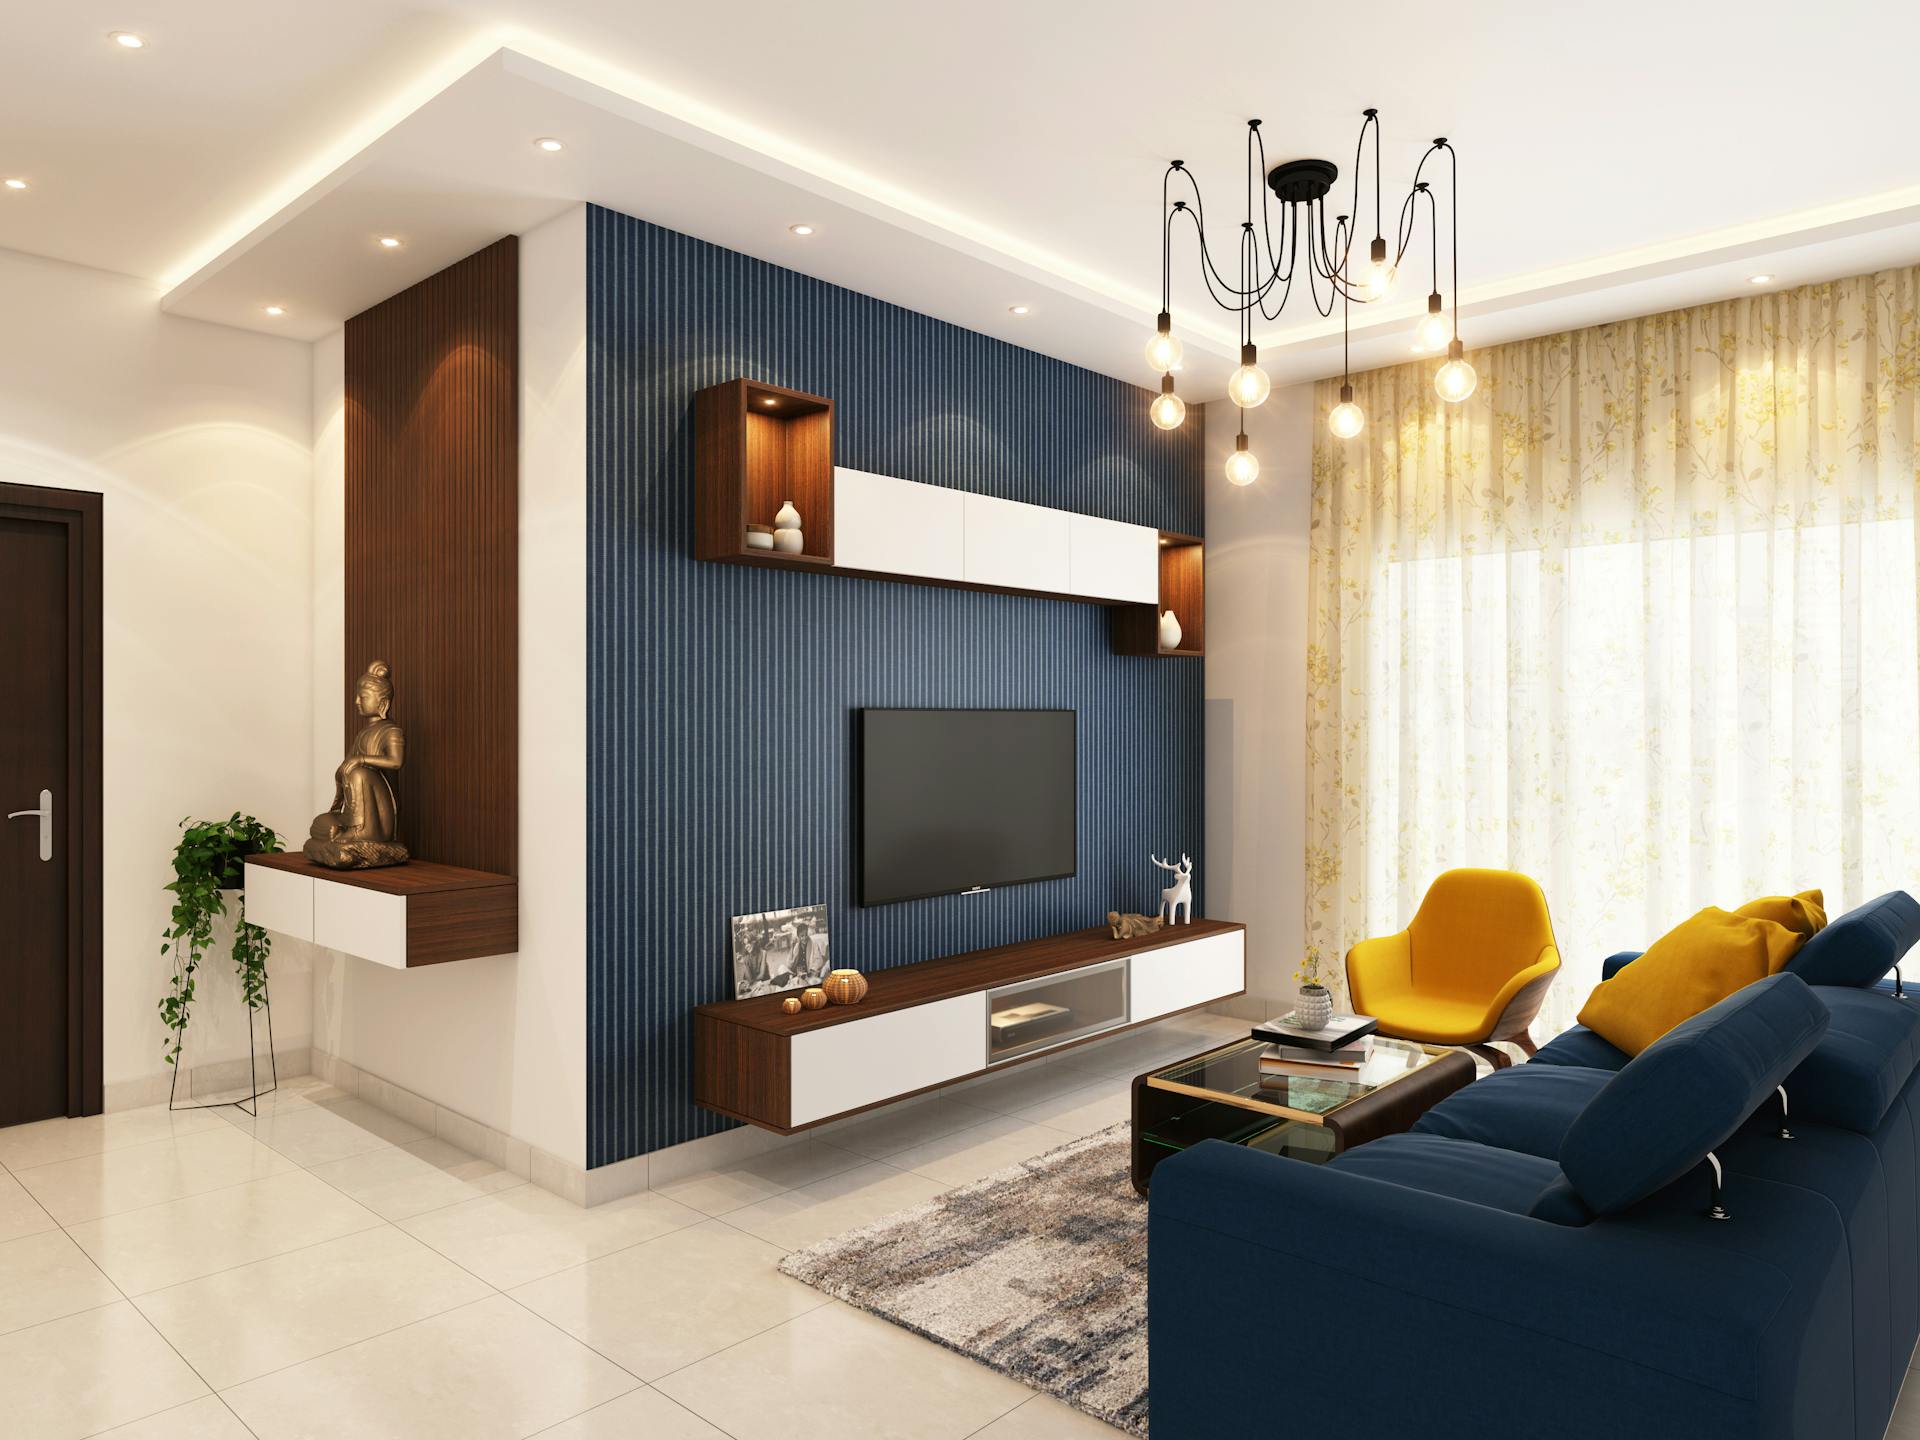 A living room with a navy textured wall, couch, and yellow chairs